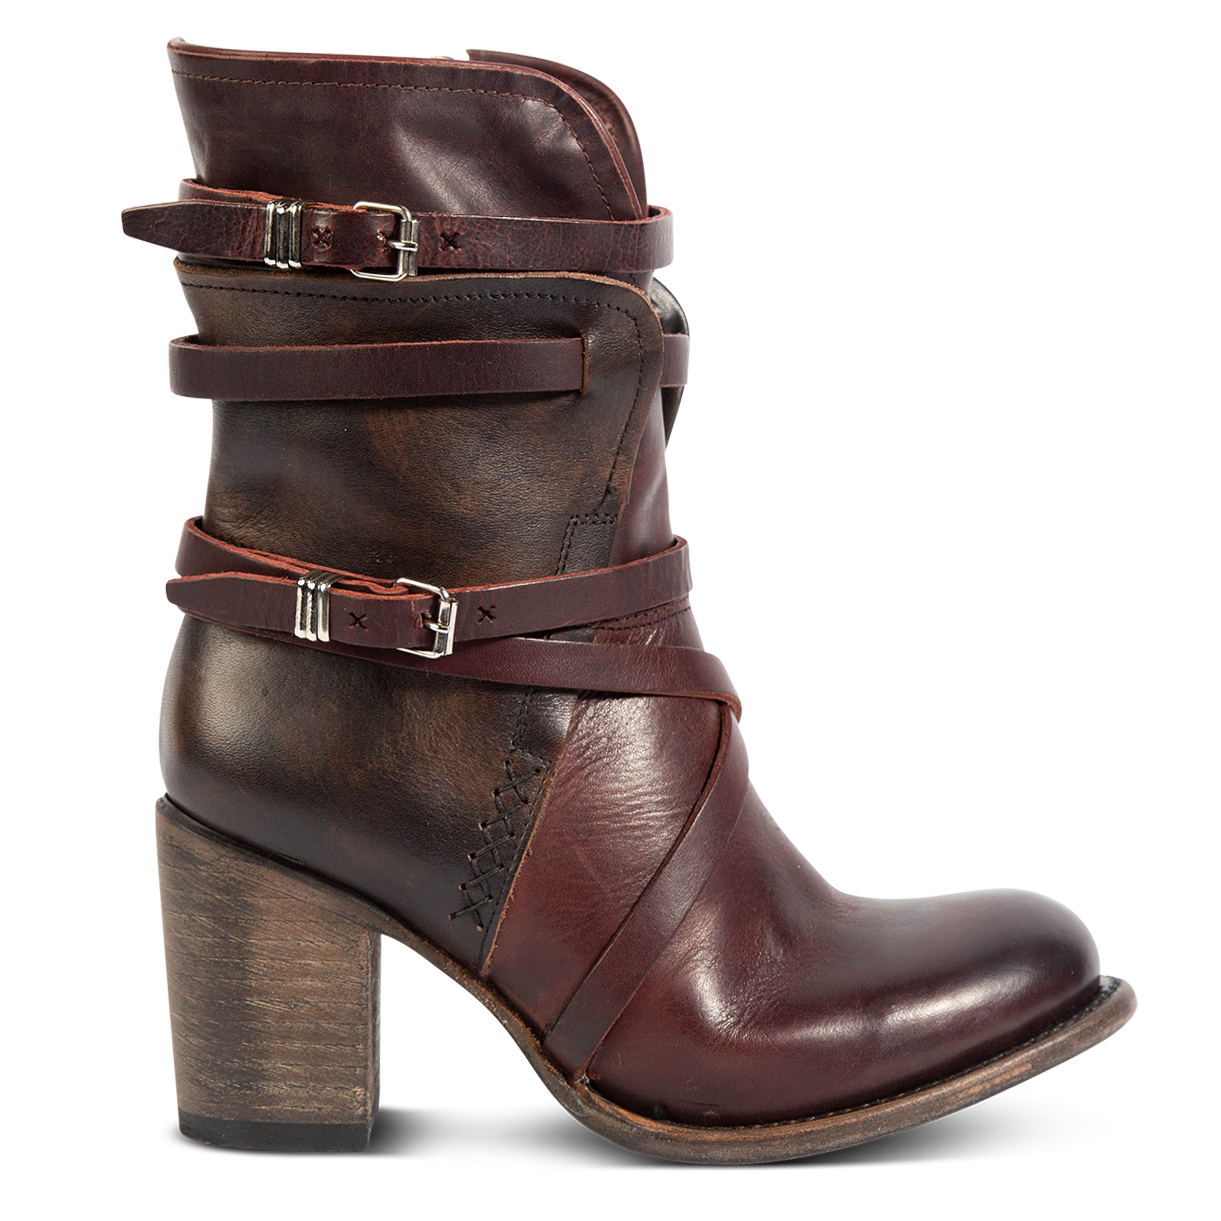 FREEBIRD women's Baker wine multi inside brass zip closure boot with fashion straps and stacked heel